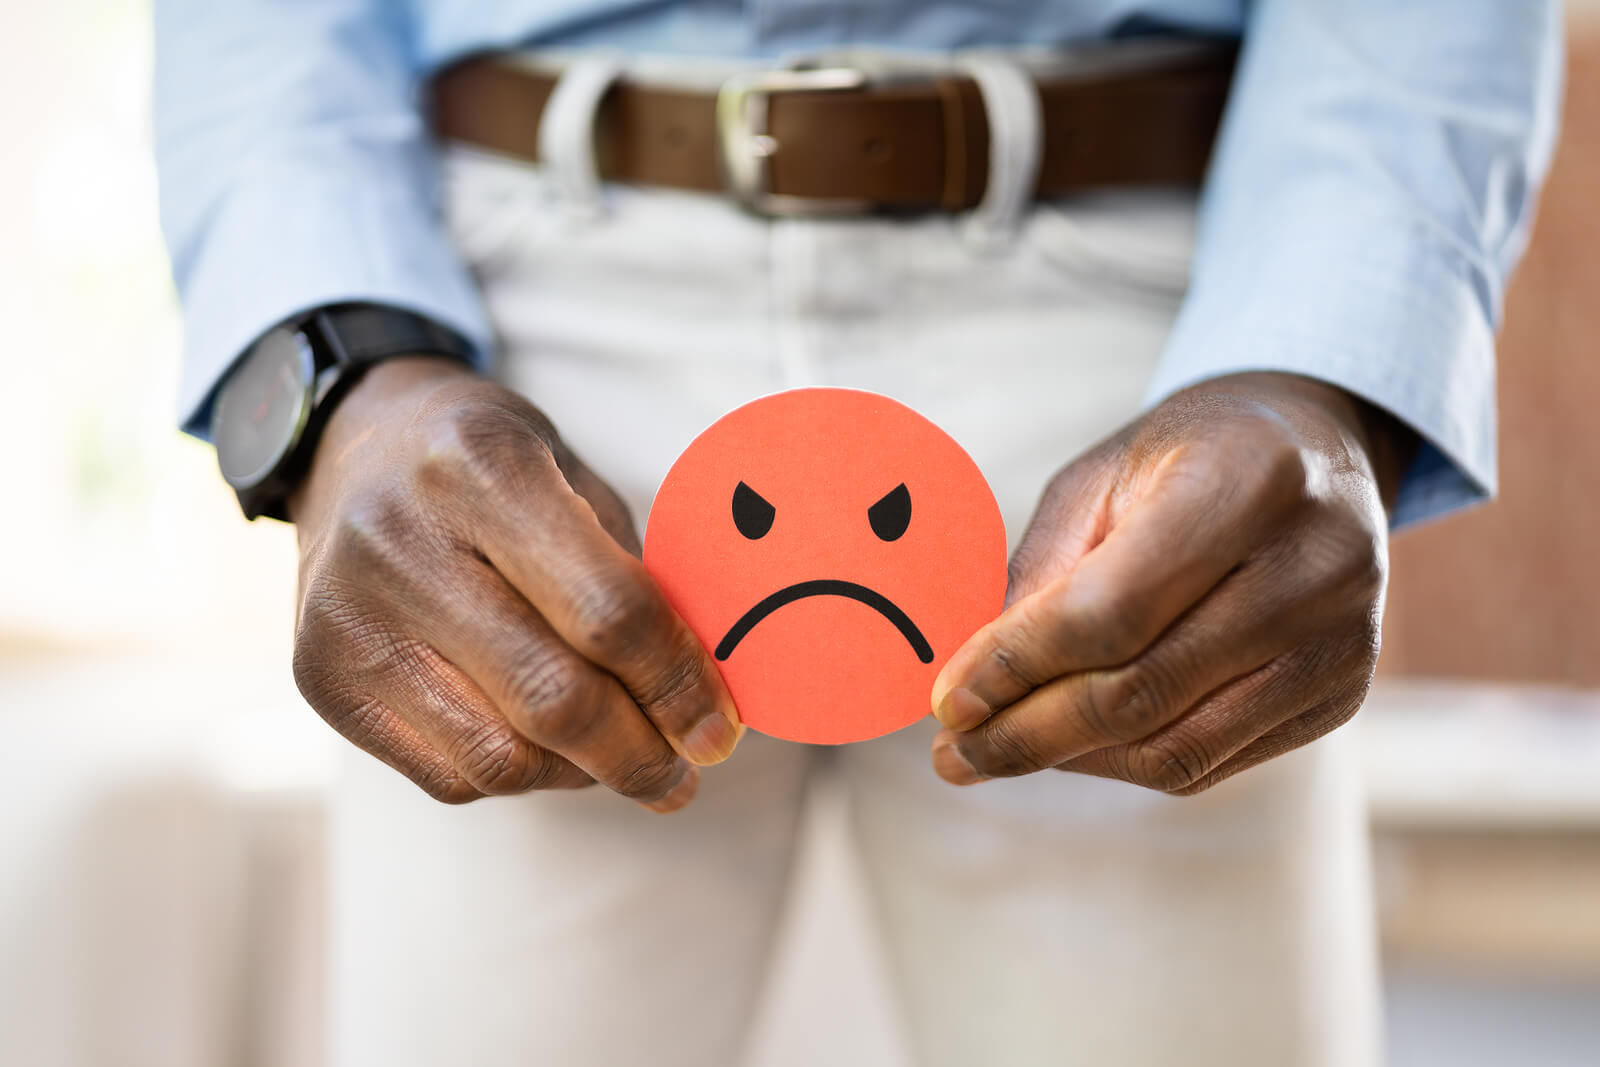 A man holds a unhappy face over his groin area representing his stress in dealing with male urinary incontinence. Pelvic Floor Physical Therapy for Male Urinary Incontinence in Washington, DC can help restore control.